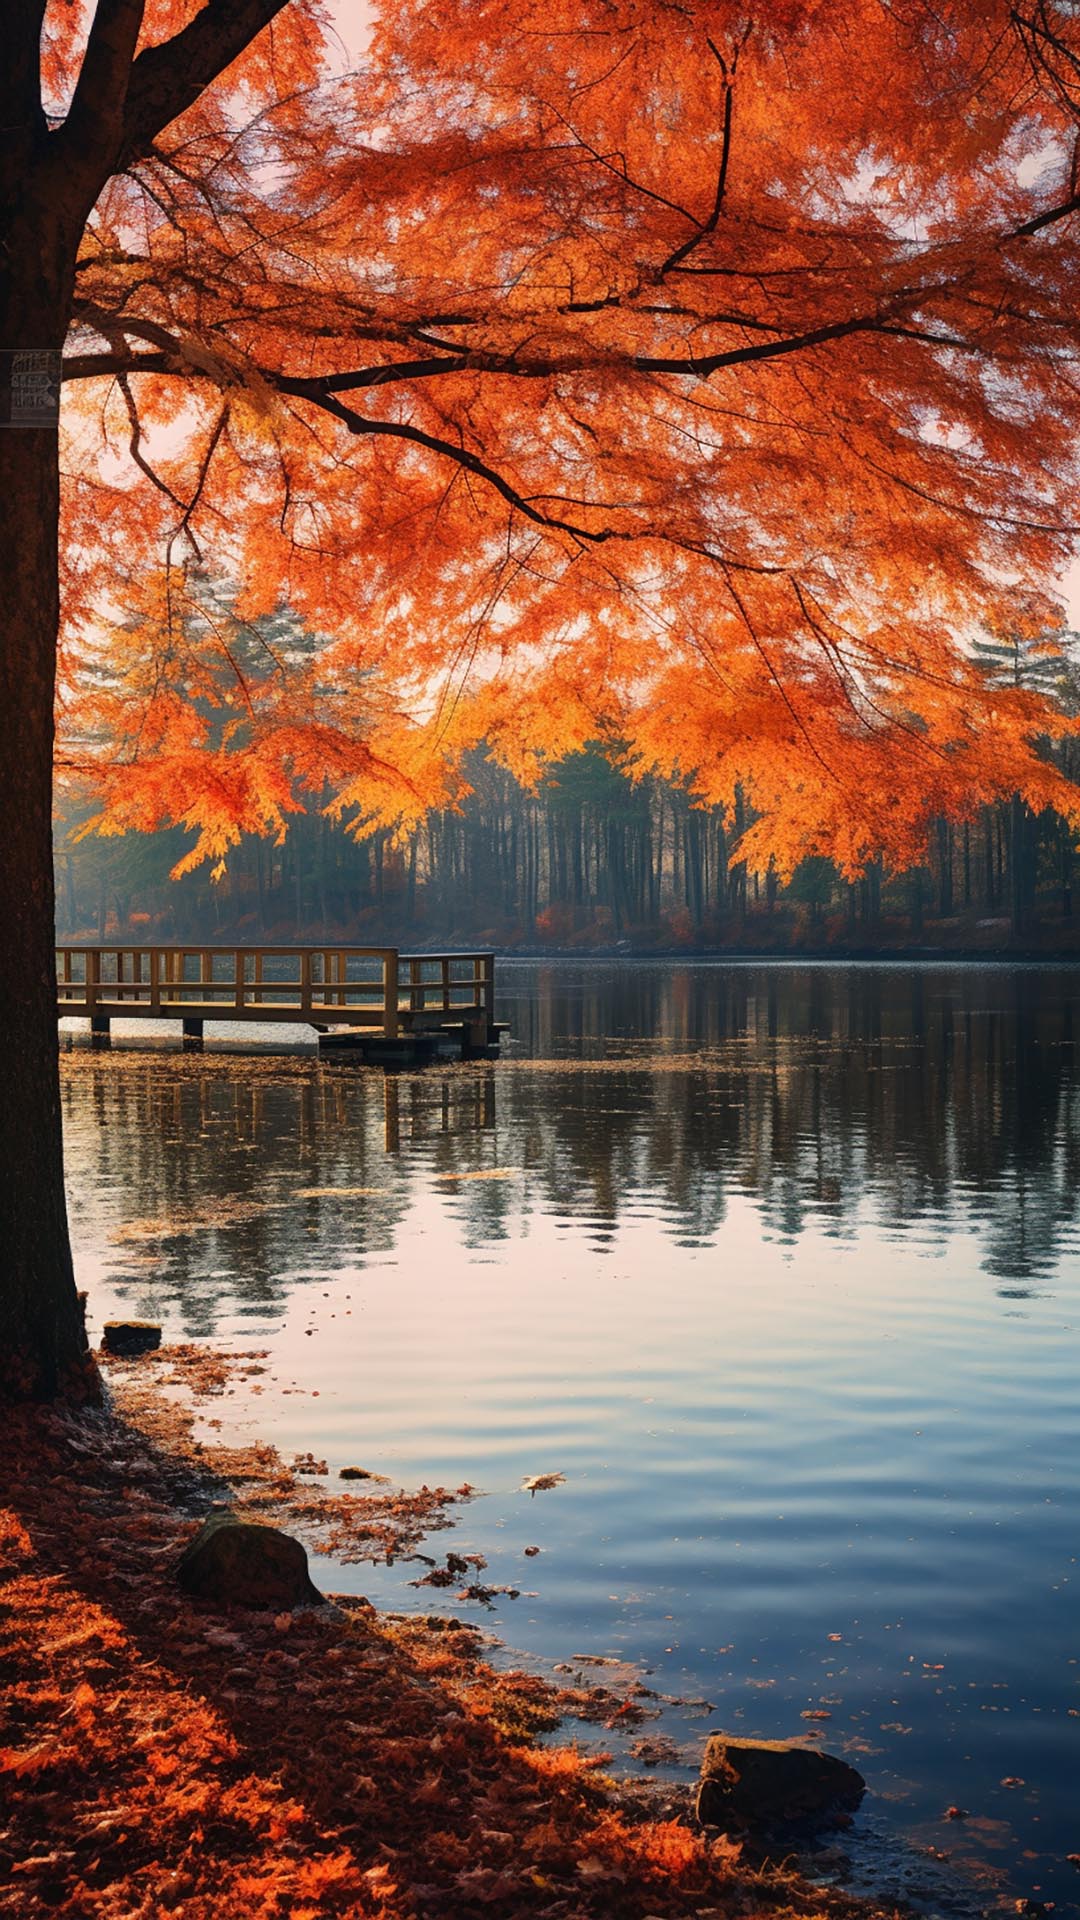 Bright orange tree leaves over reflecting water